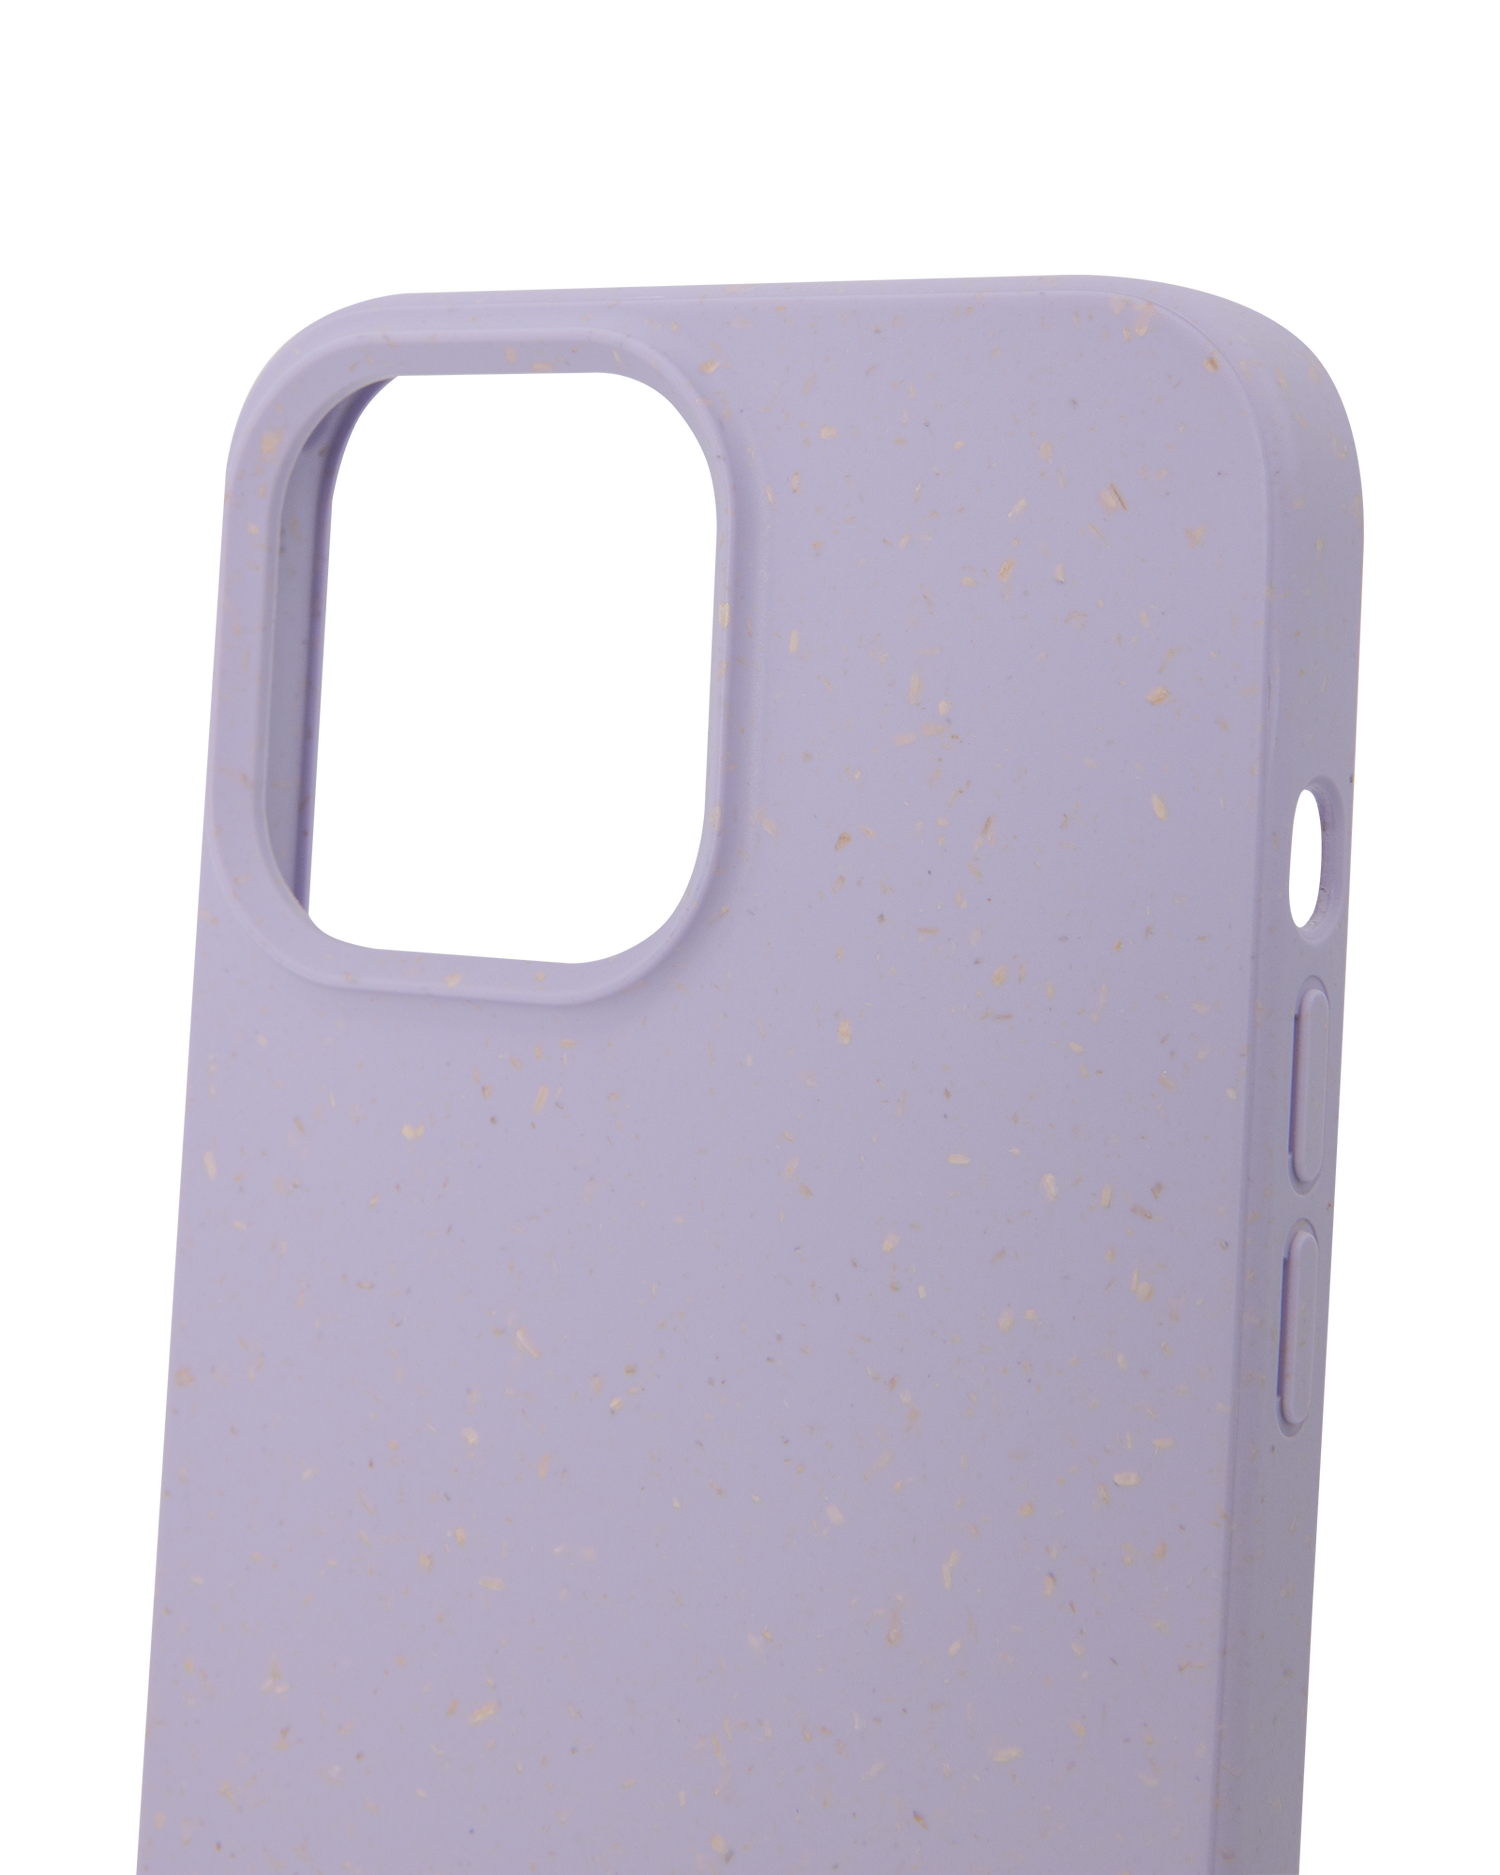 Purple Eco-Friendly Phone Case for Apple iPhone 12 Pro Max: Details outside